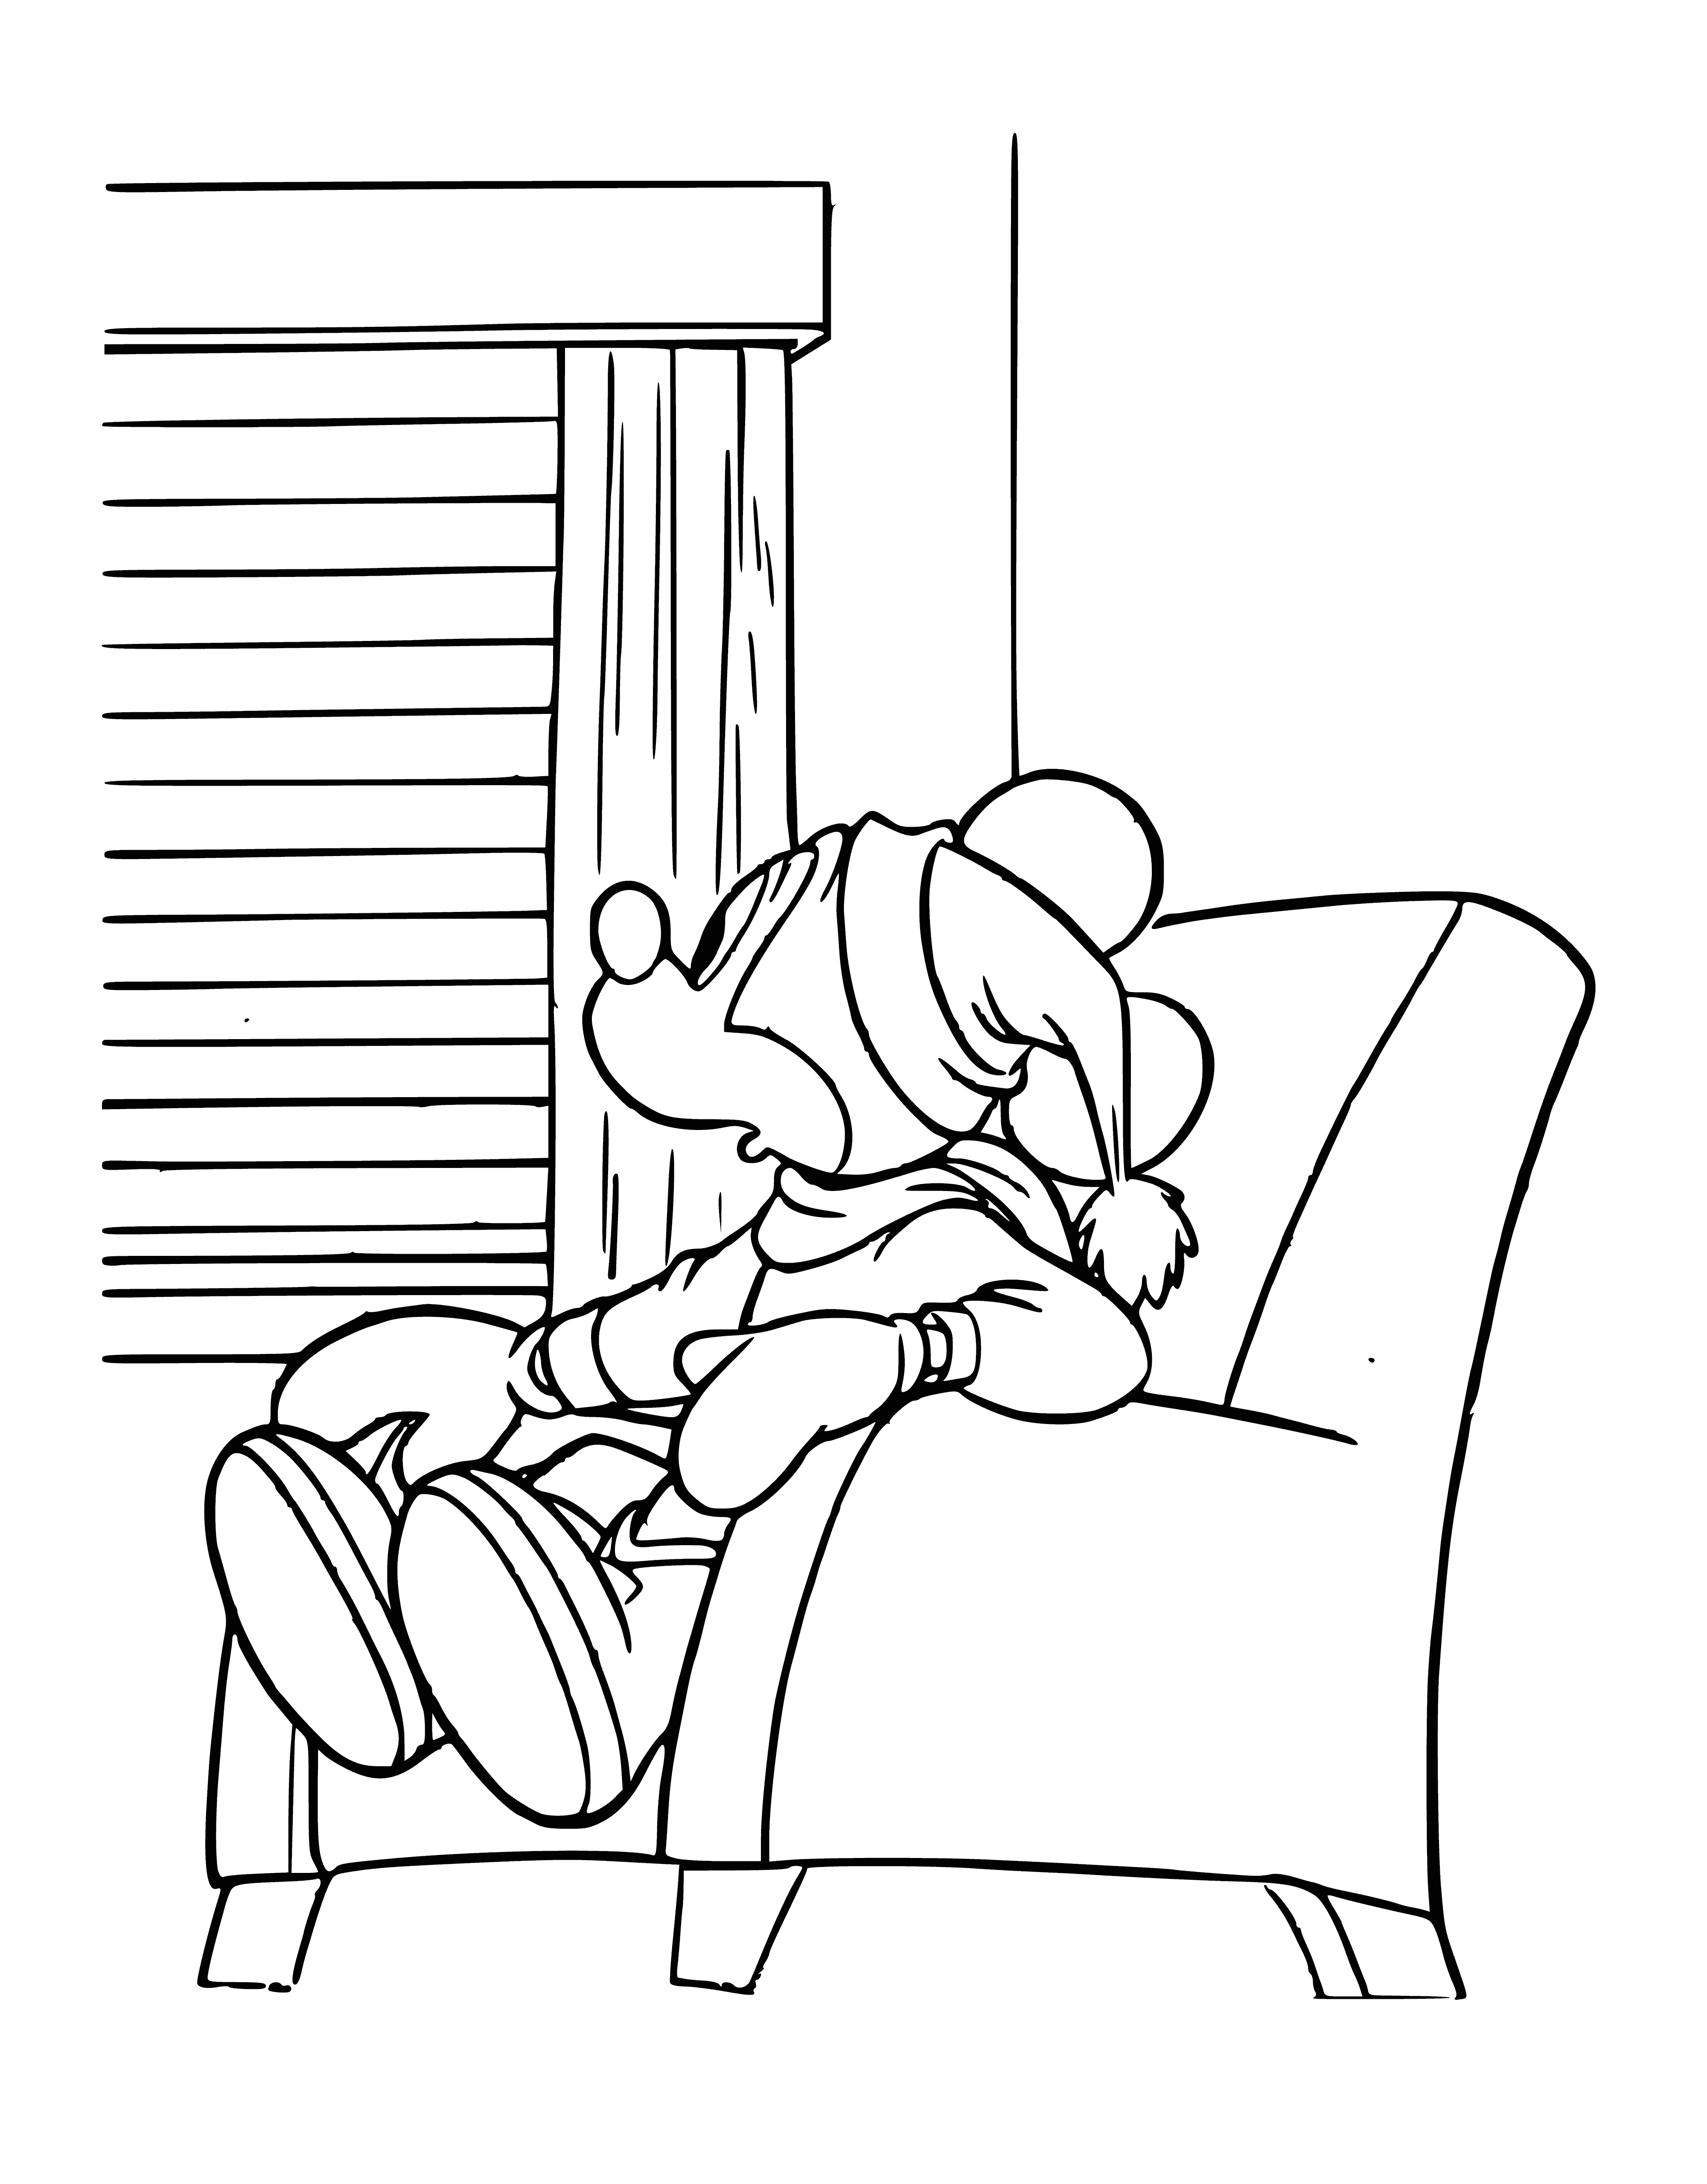 coloring page: A blue armchair with a yellow pillow is the centerpiece, nearby are a brown table, white lamp, bookshelf of books & window framing a view of the city- Mickey Mouse happily reads in the chair.